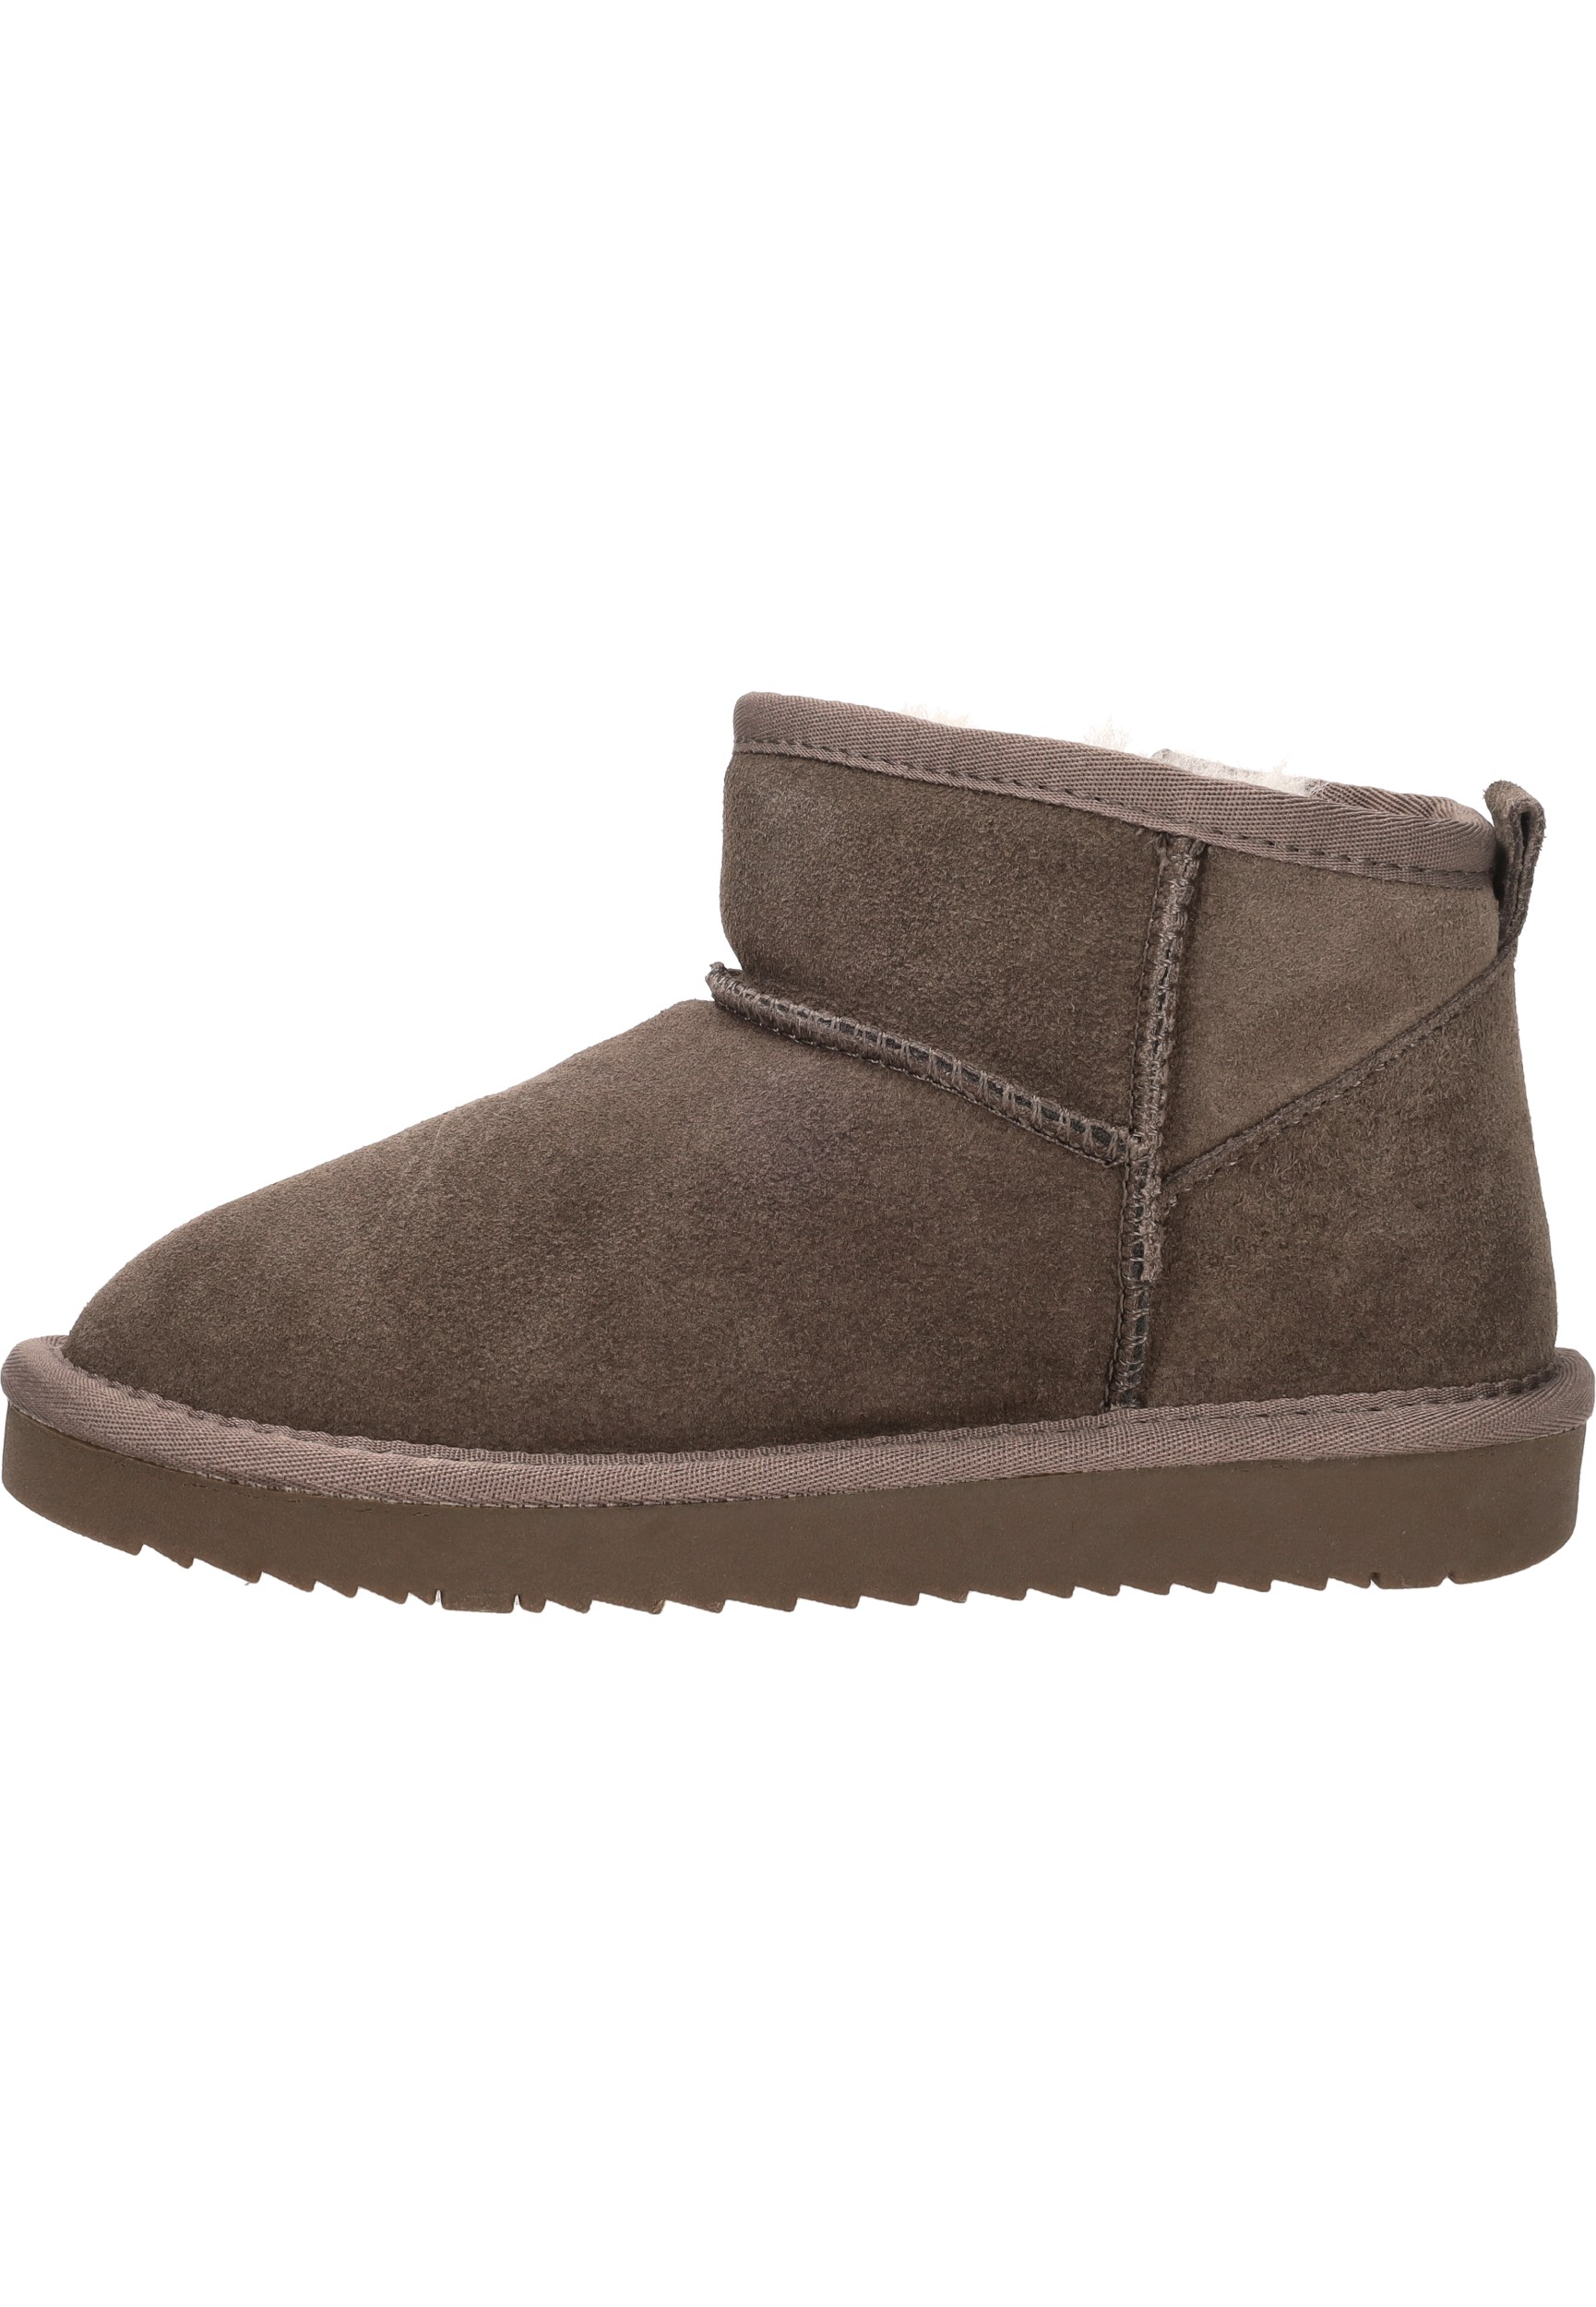 PS Poelman Boot Meisjes Taupe